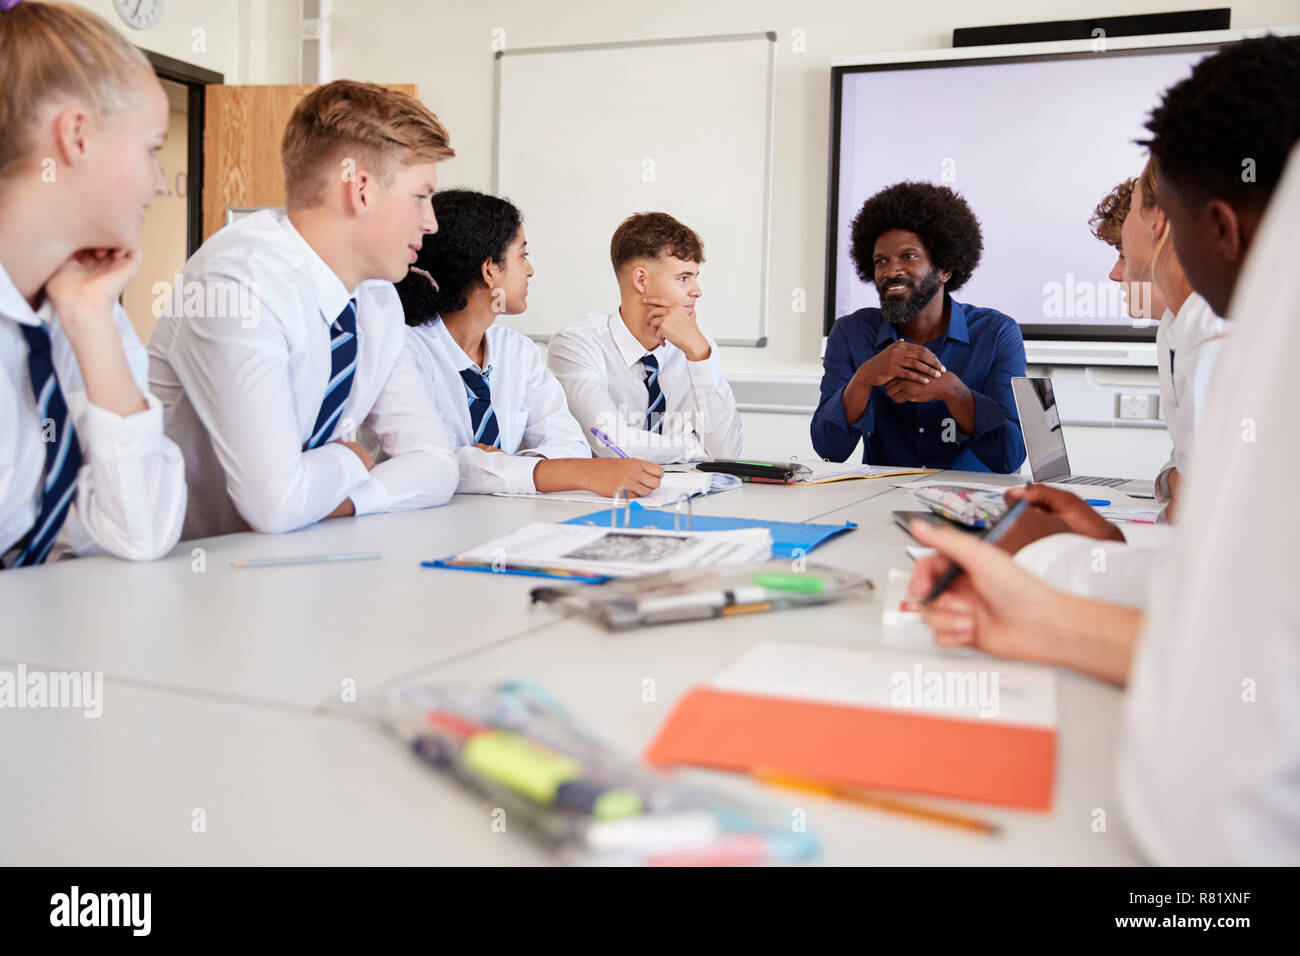 Male High School Teacher Sitting At Table With Teenage Pupils Wearing Uniform Teaching Lesson Stock Photo